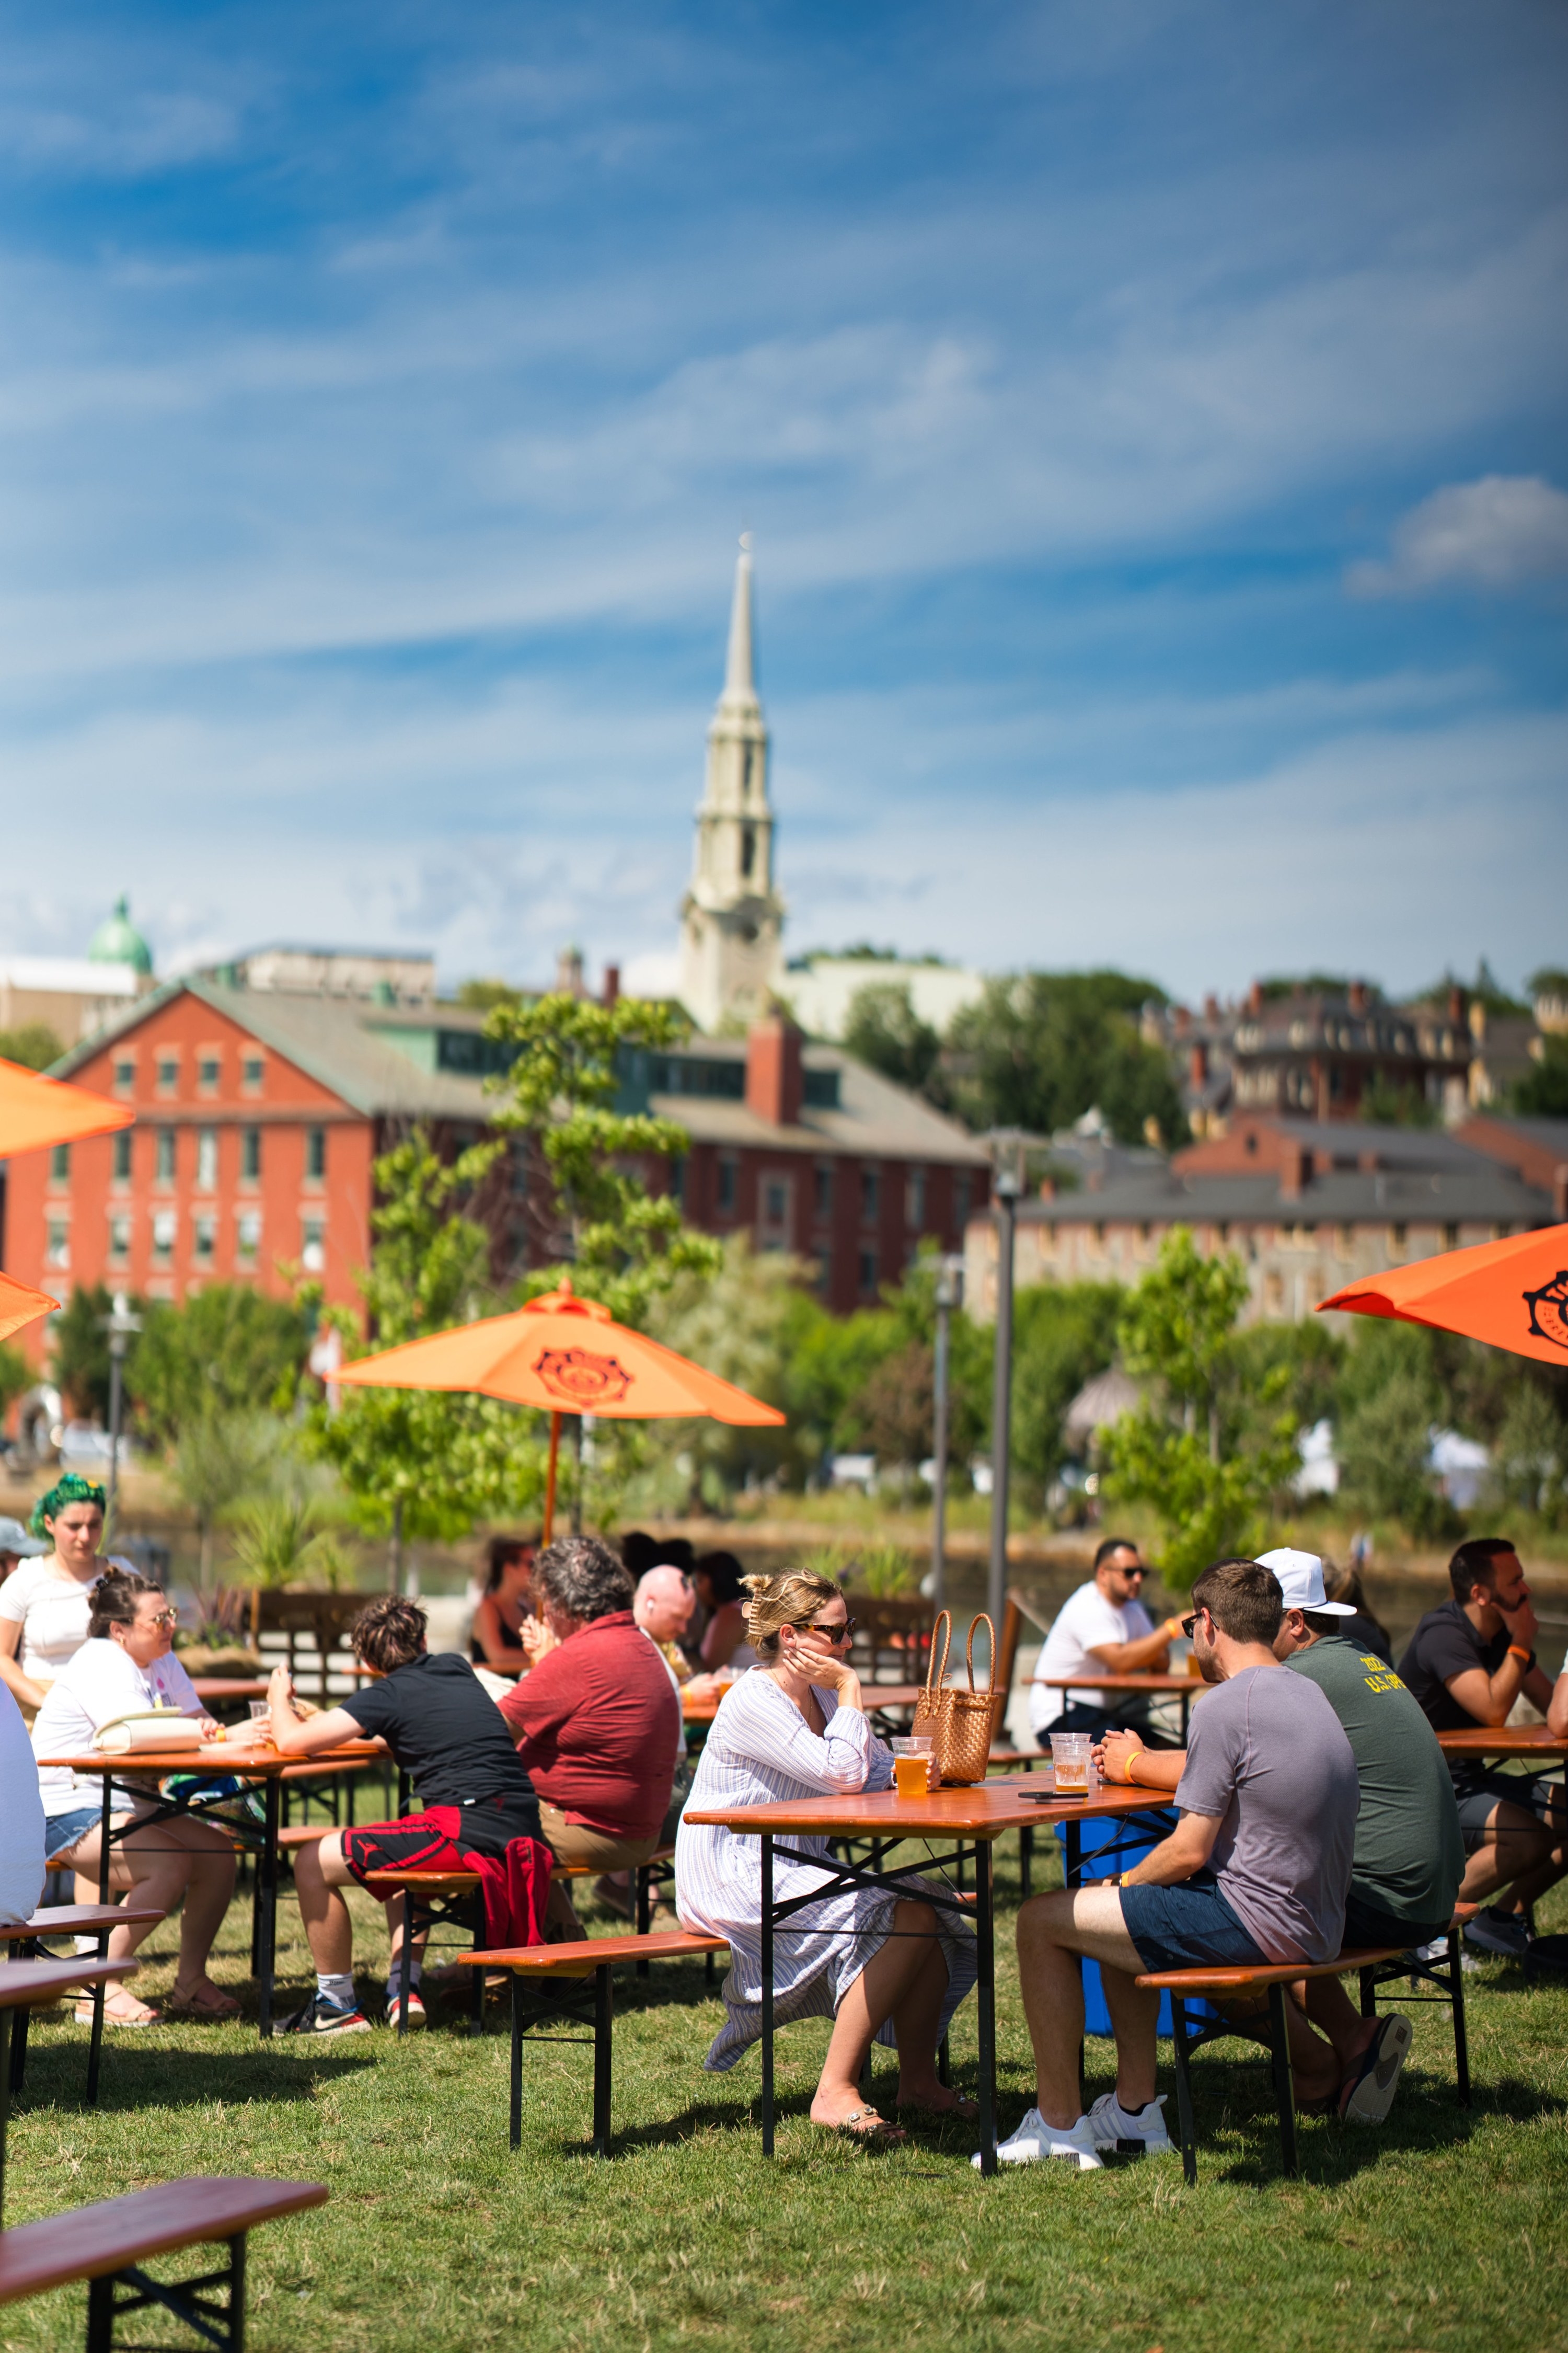 People drinking beer in an outdoor cafe in Providence, Rhode Island